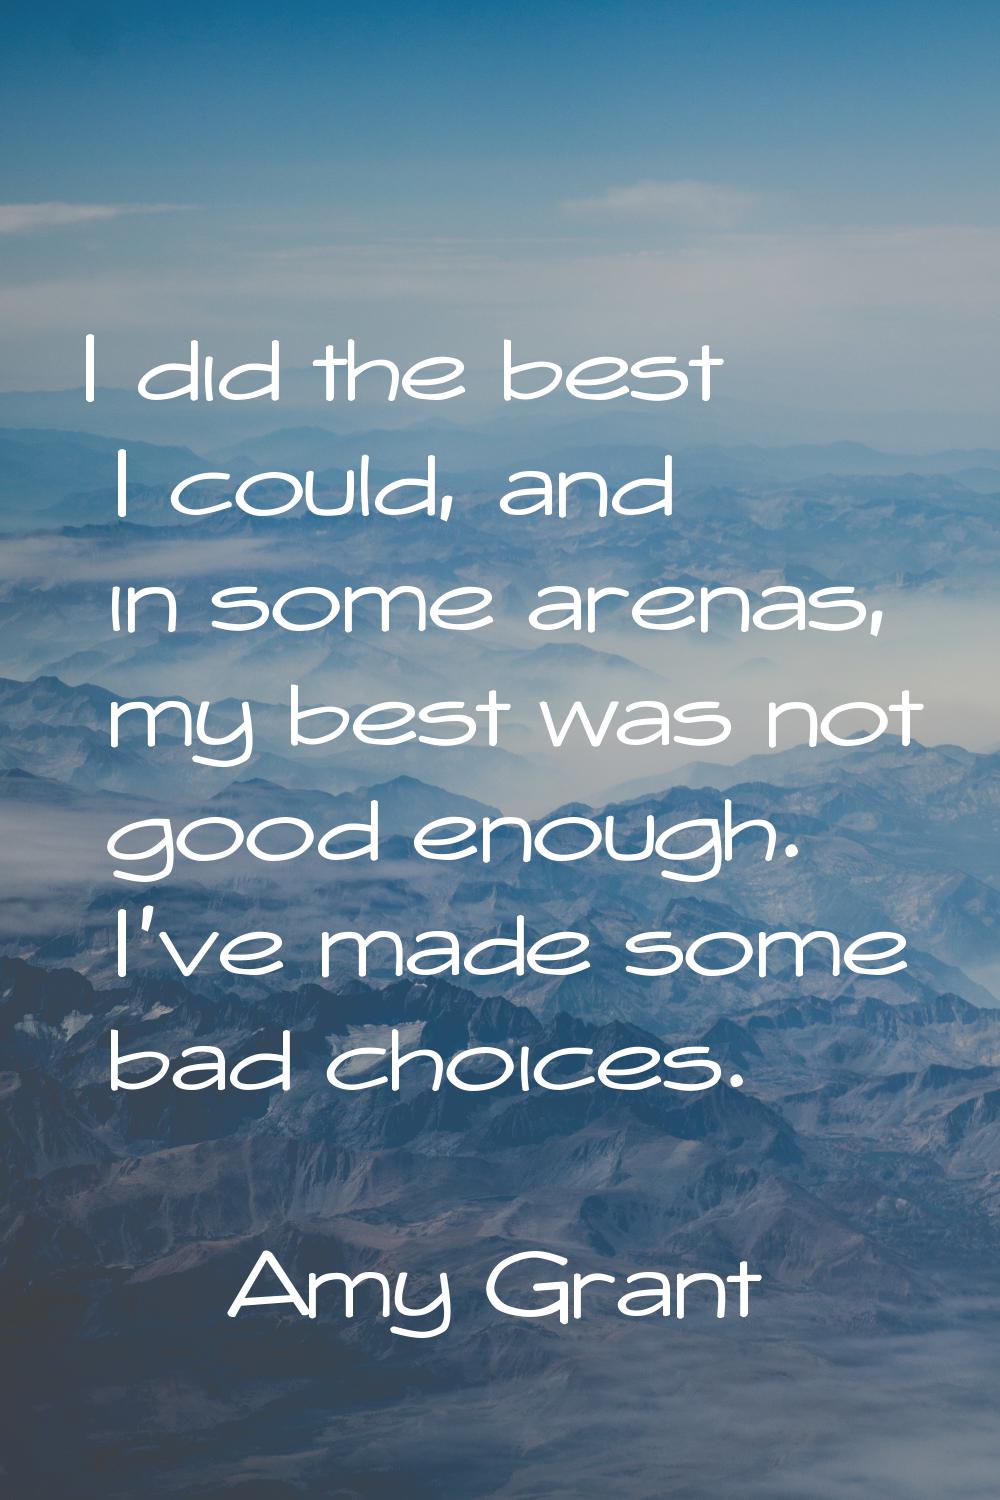 I did the best I could, and in some arenas, my best was not good enough. I've made some bad choices